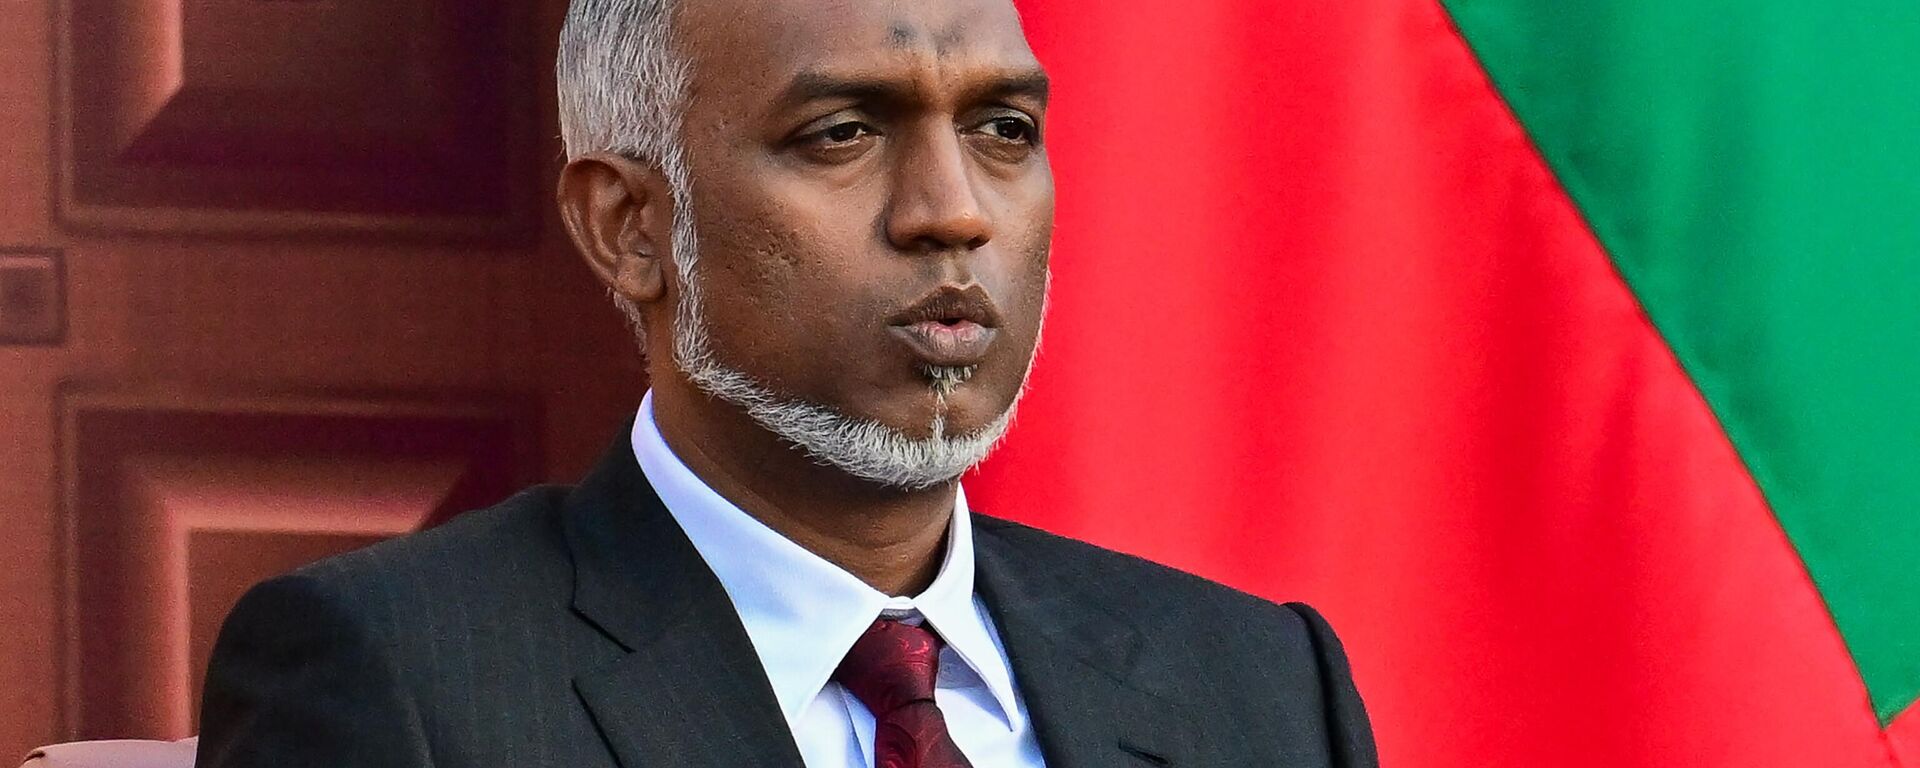 Maldives' President Mohamed Muizzu looks on after reading the oath during his inauguration ceremony in Male on November 17, 2023. President Mohamed Muizzu of the Maldives vowed on November 17 to expel Indian troops deployed in the strategically located archipelago, in his first speech to the nation after being sworn into power. - Sputnik भारत, 1920, 18.11.2023